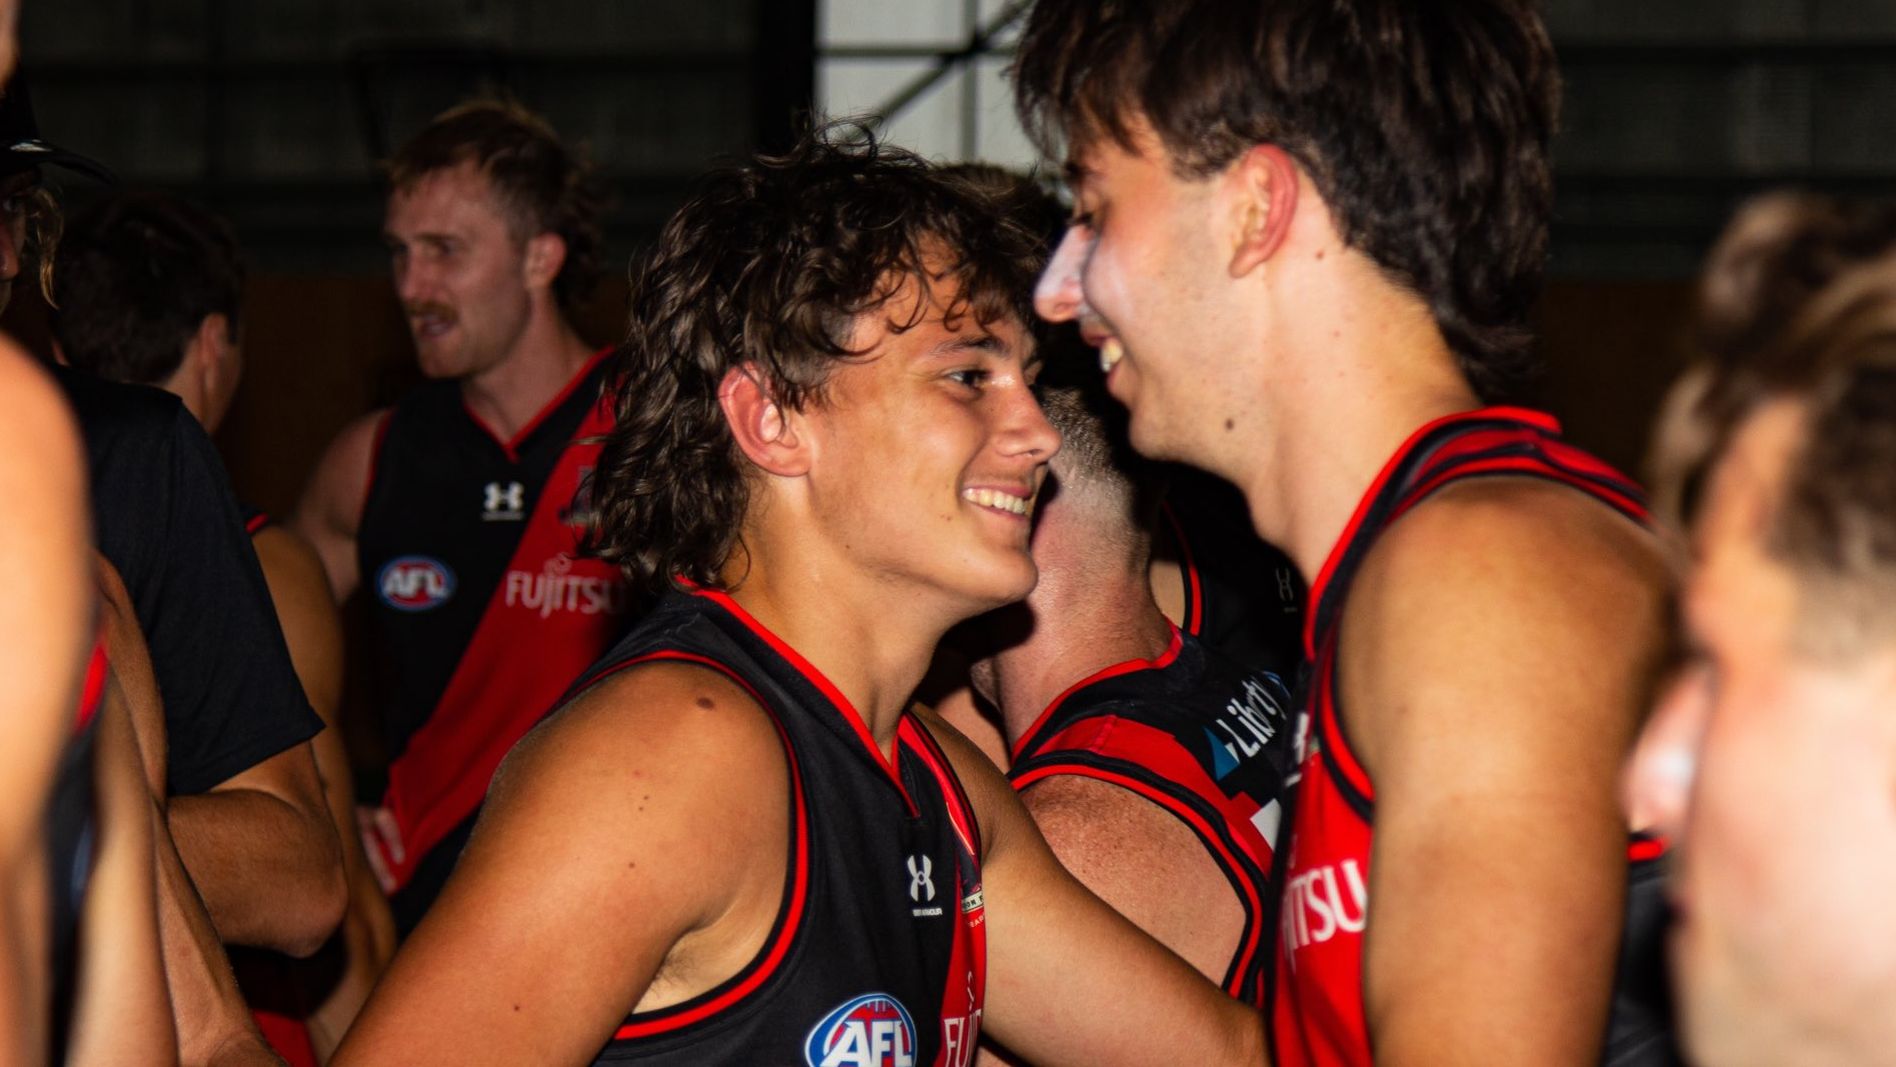 AFL legend's son signed by Essendon Bombers after impressive trial game